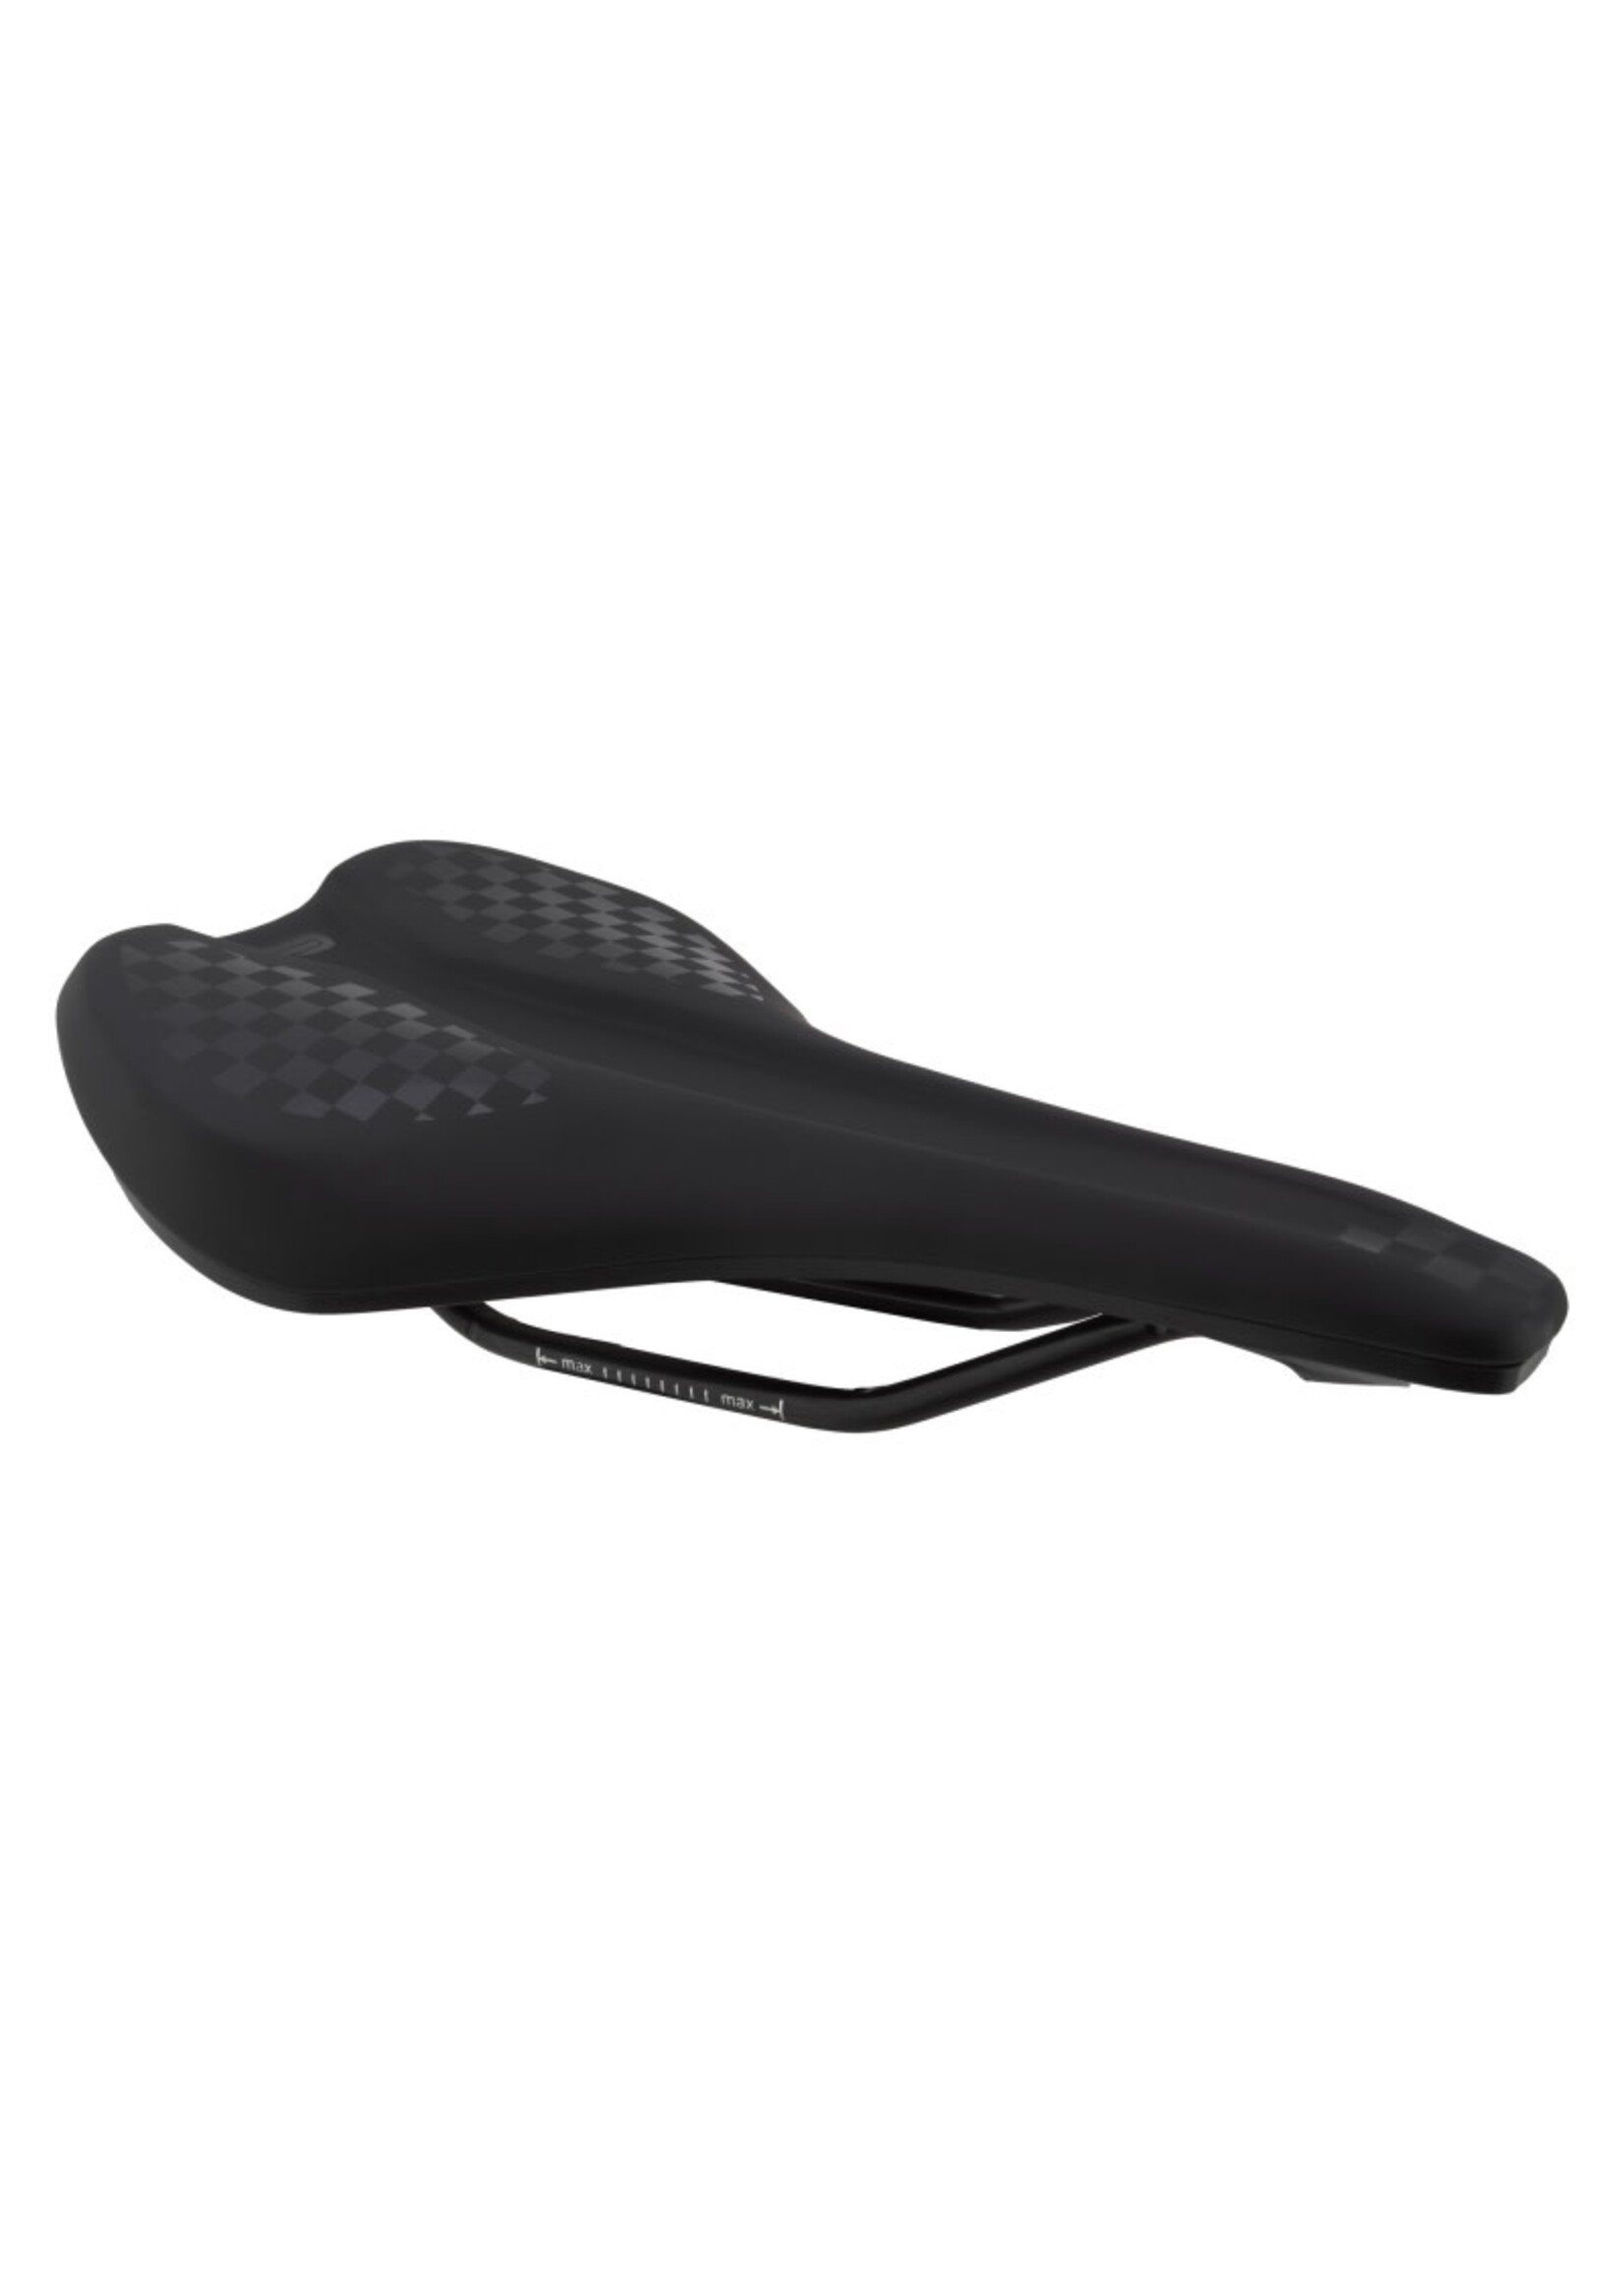 PURE CYCLES Dart Med Saddle Black